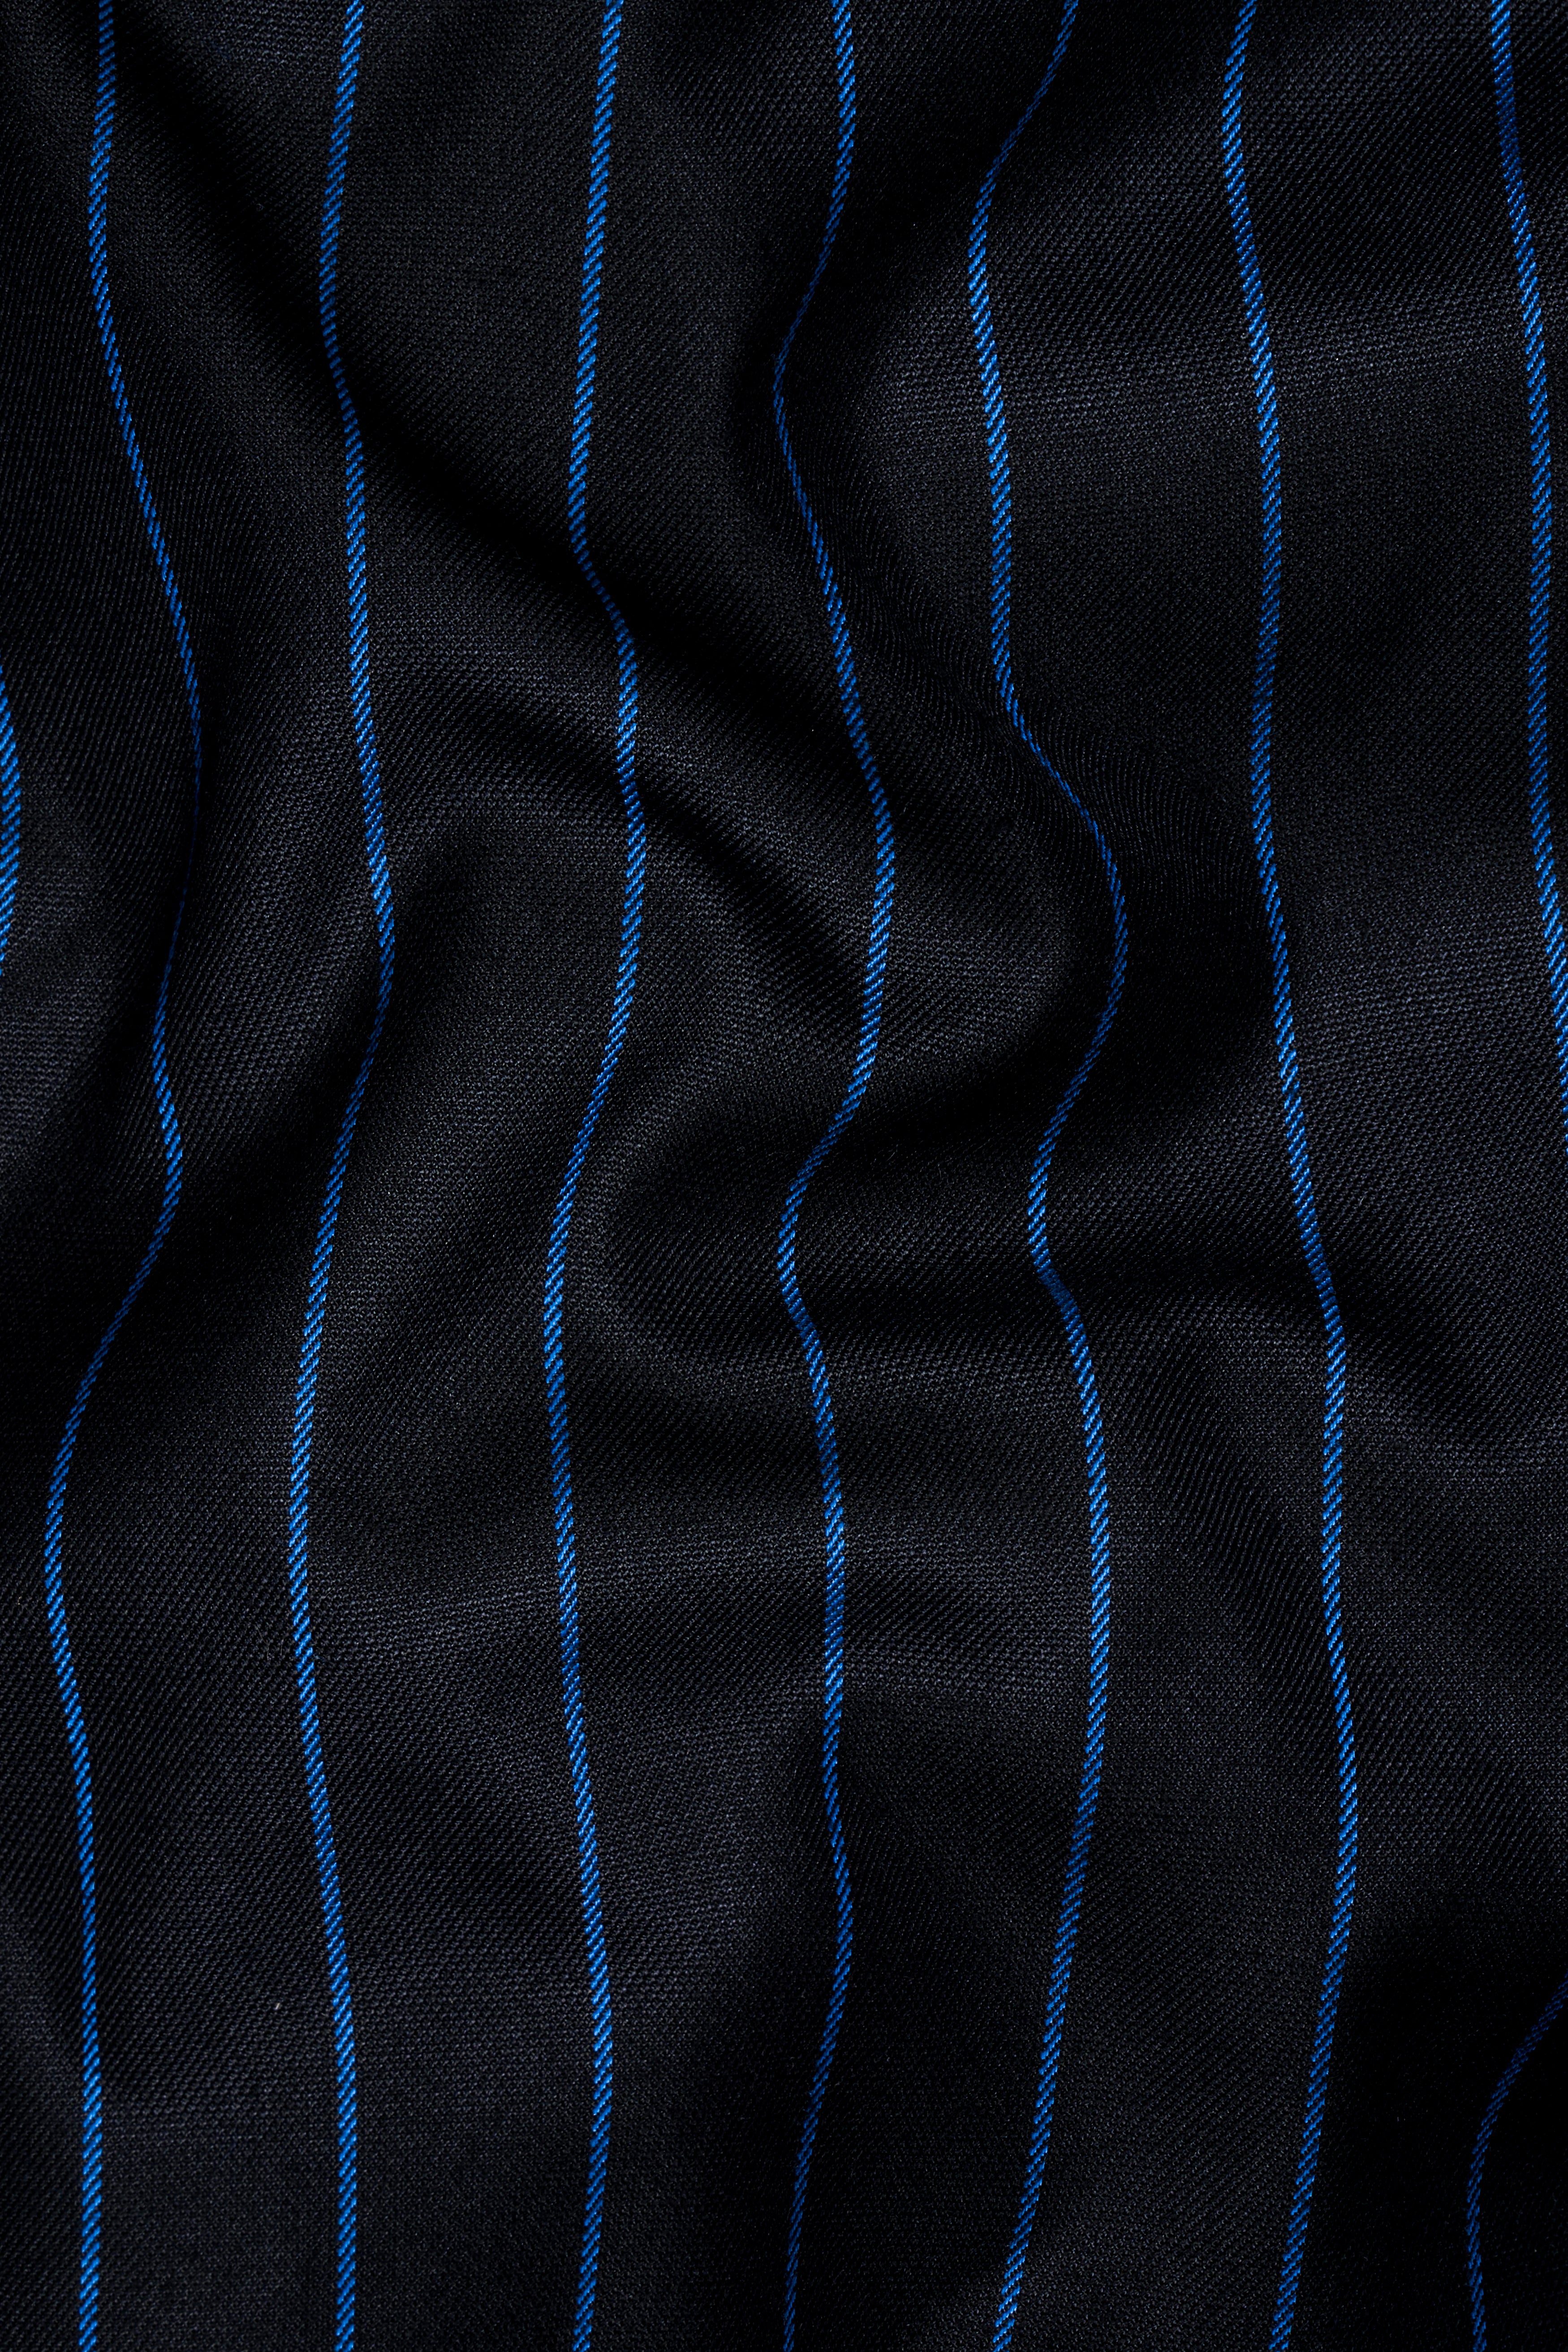 Jade Black with Persian Blue Striped Wool Rich Designer Blazer BL2854-SB-D399-36, BL2854-SB-D399-38, BL2854-SB-D399-40, BL2854-SB-D399-42, BL2854-SB-D399-44, BL2854-SB-D399-46, BL2854-SB-D399-48, BL2854-SB-D399-50, BL2854-SB-D399-52, BL2854-SB-D399-54, BL2854-SB-D399-56, BL2854-SB-D399-58, BL2854-SB-D399-60